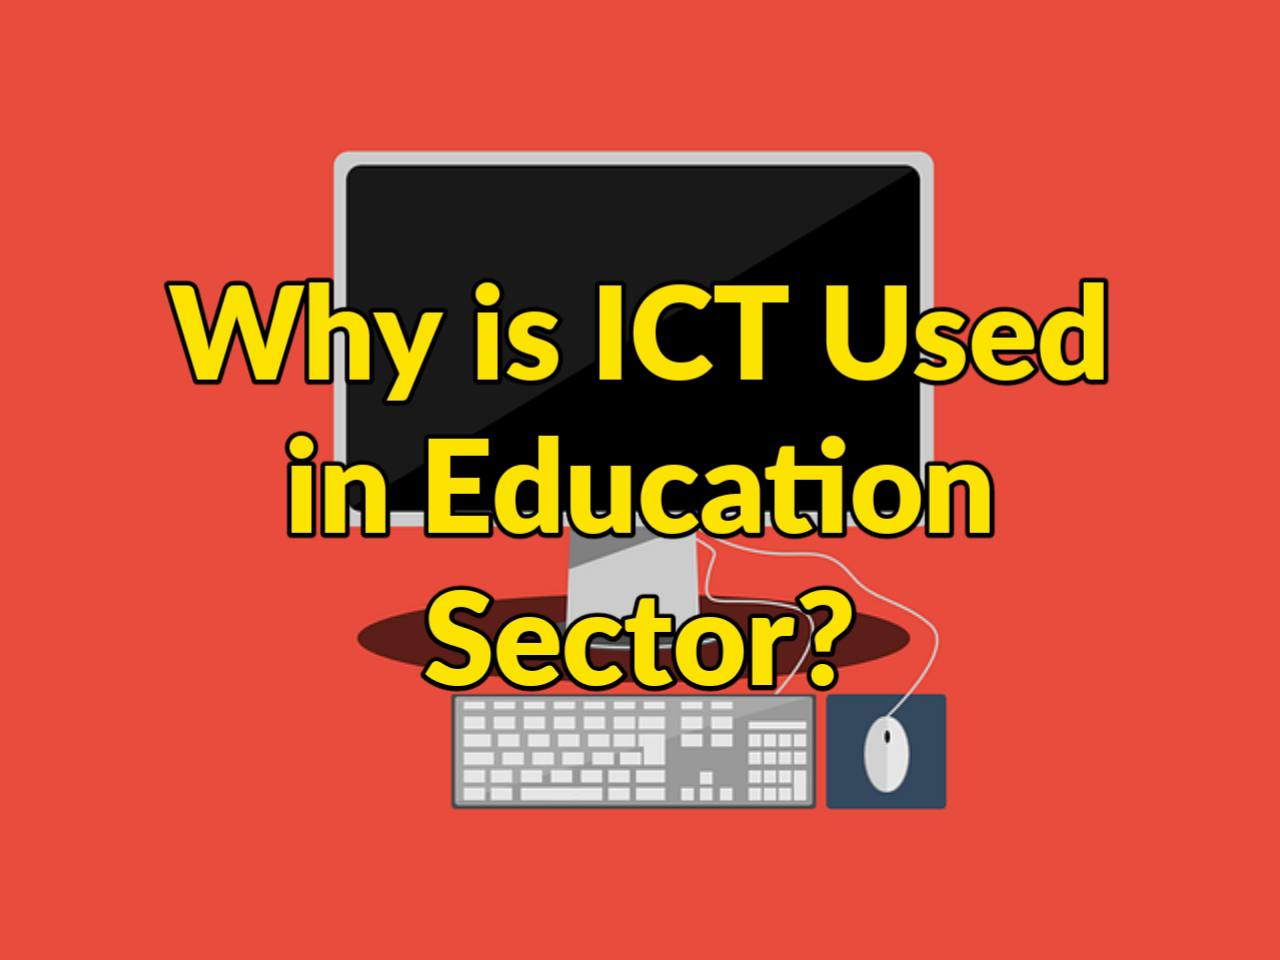 Why is ICT Used in Education Sector